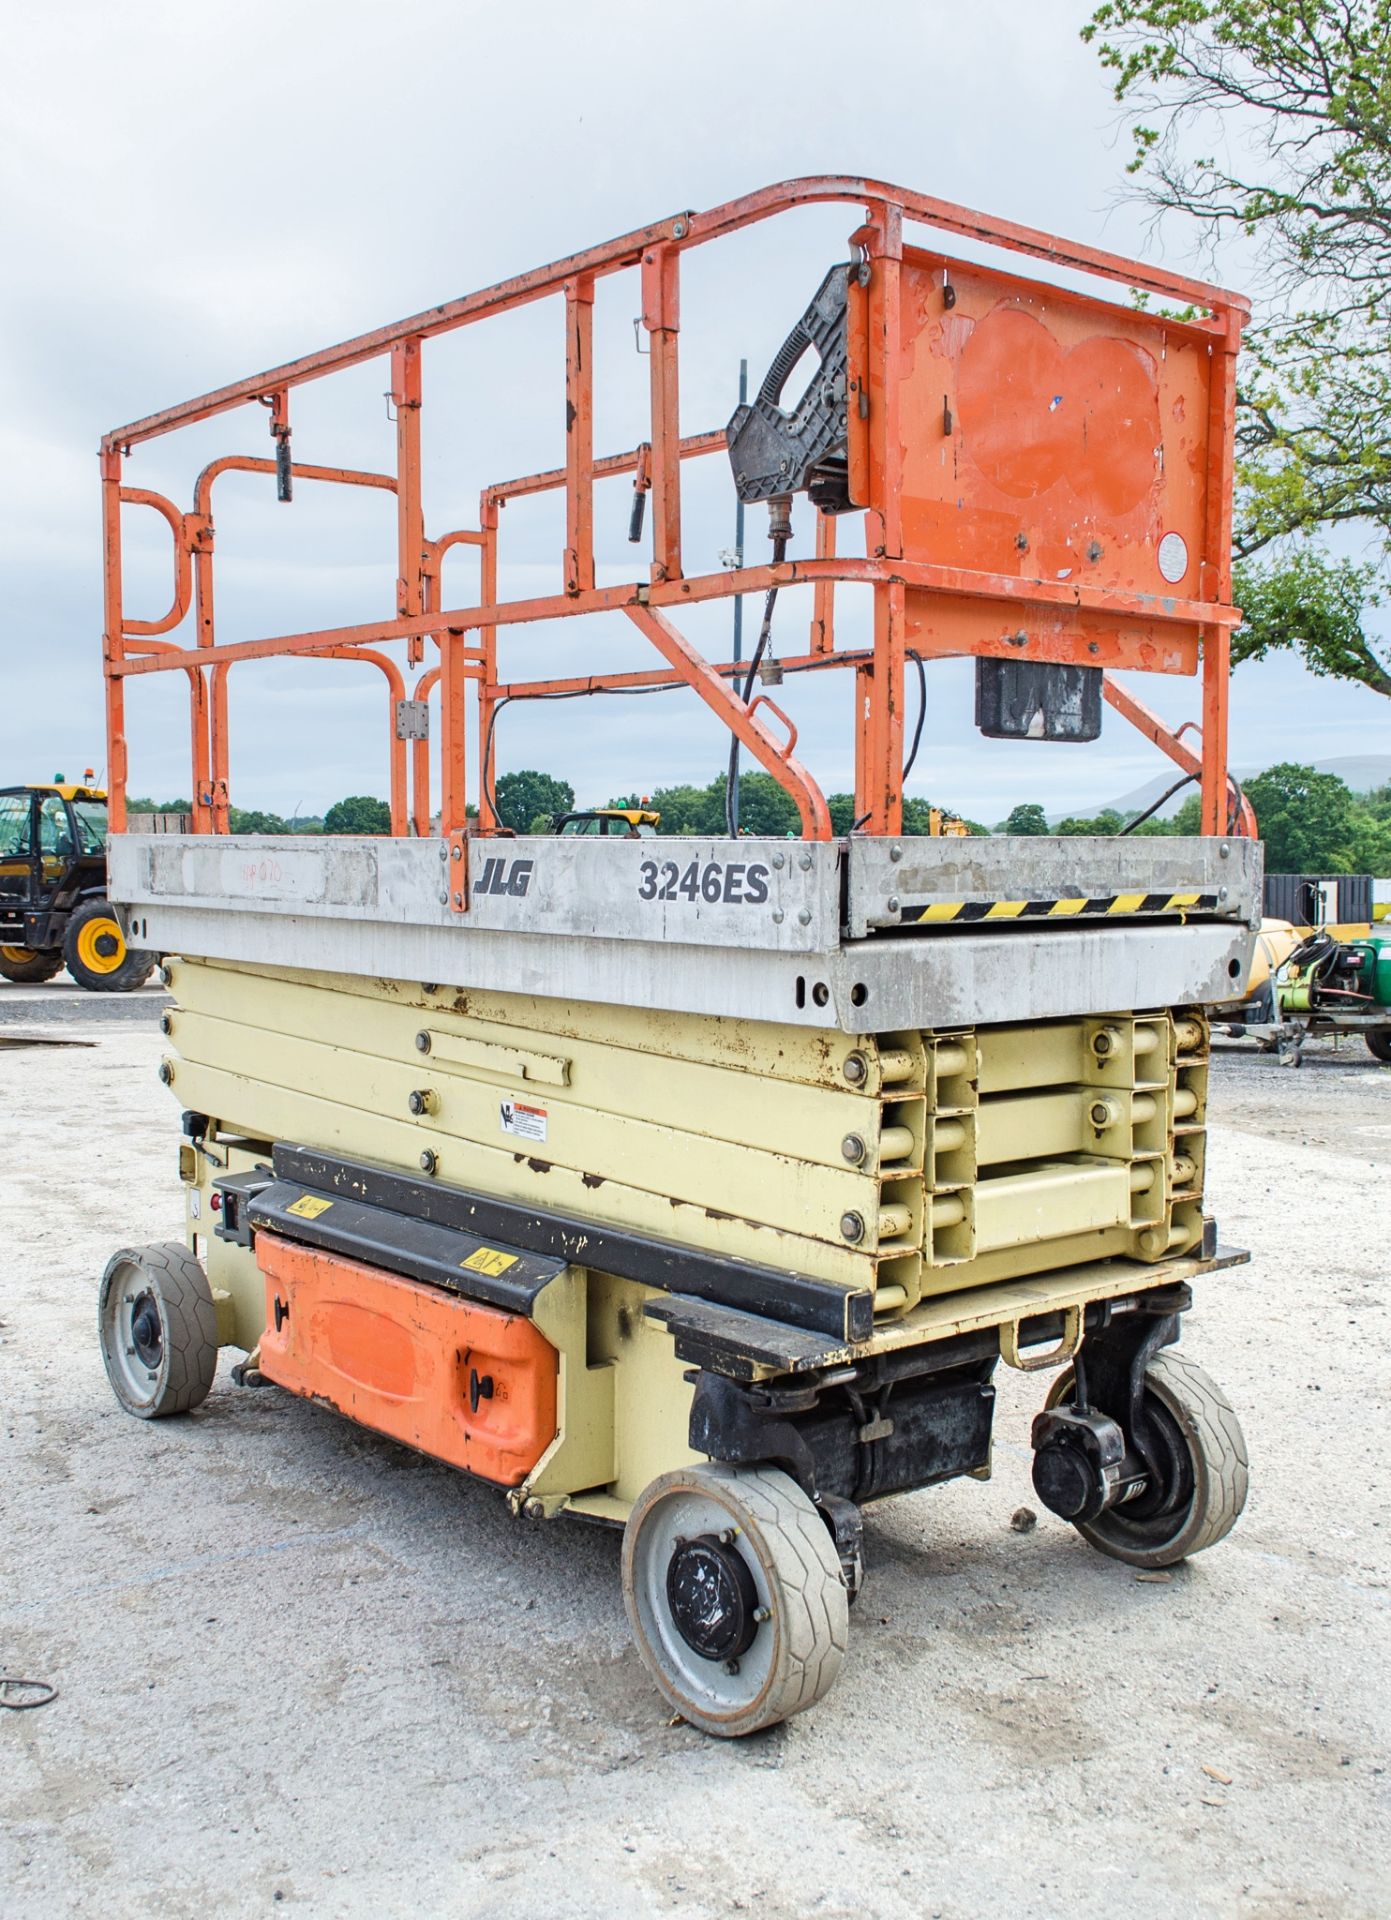 JLG 3246 ES battery electric scissor lift Year: 2006 S/N: 1200007929 Recorded hours: 467 HYP070 - Image 4 of 9